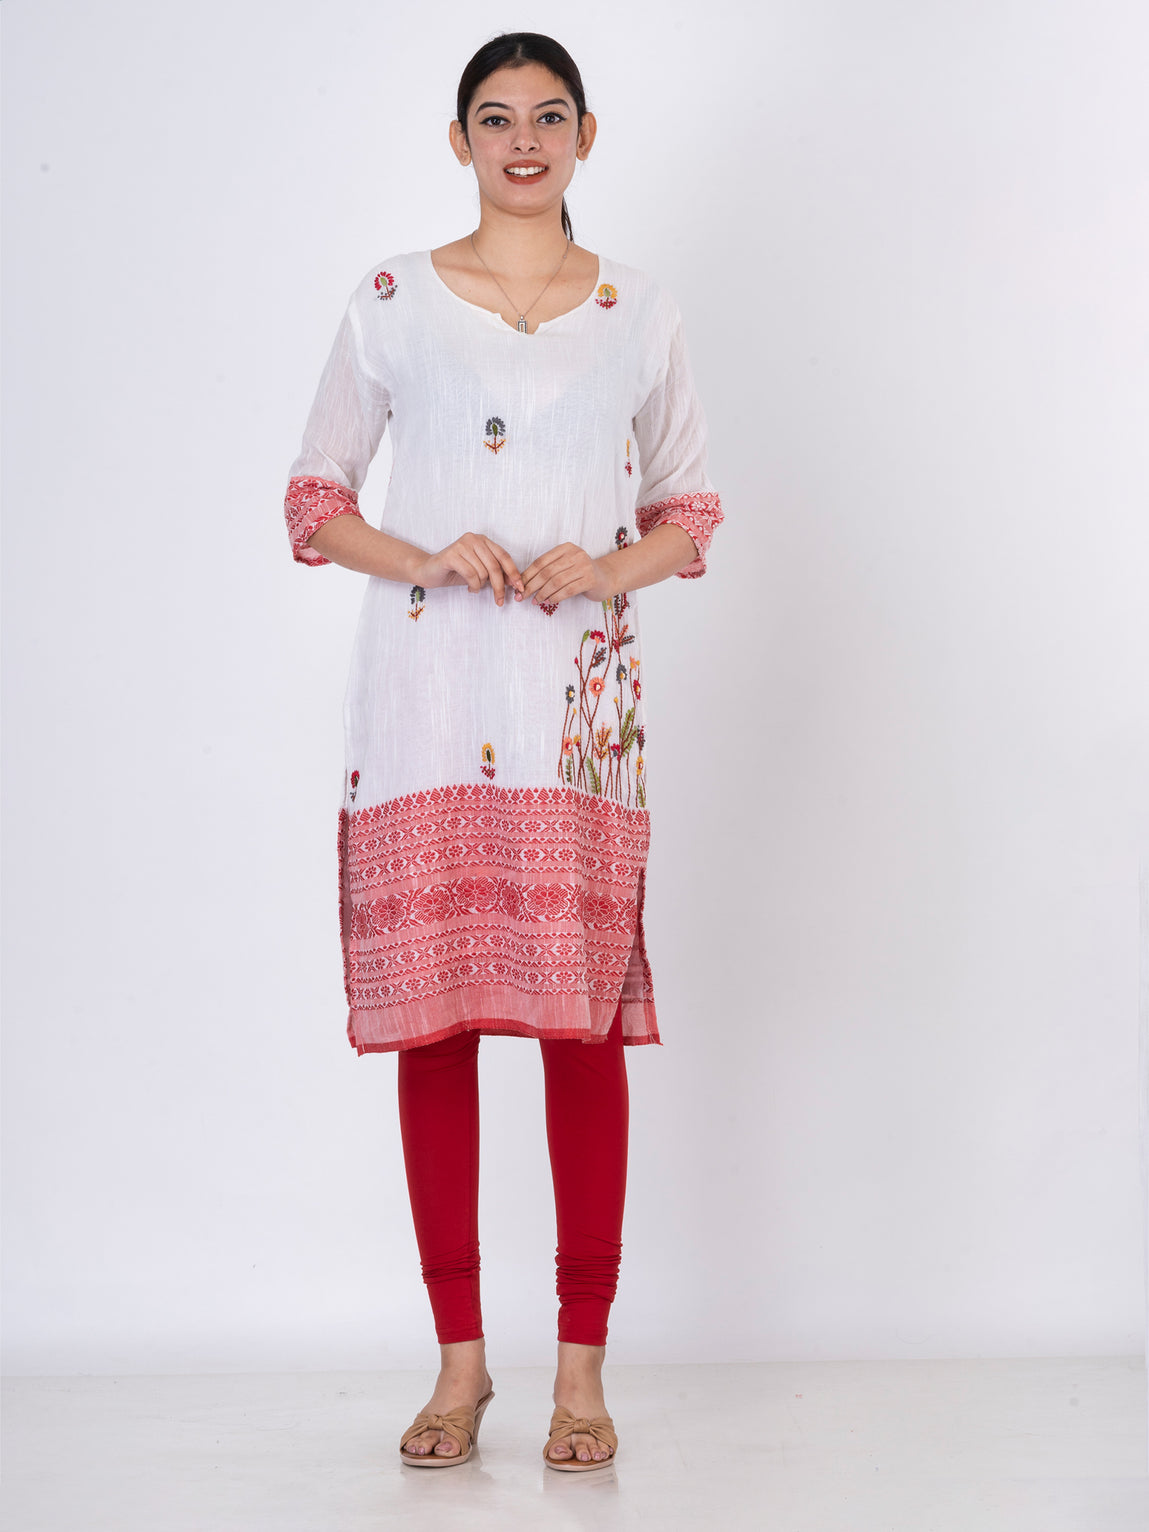 Shop Off White Rayon Plazoo Pant Work Wear Online at Best Price | Cbazaar